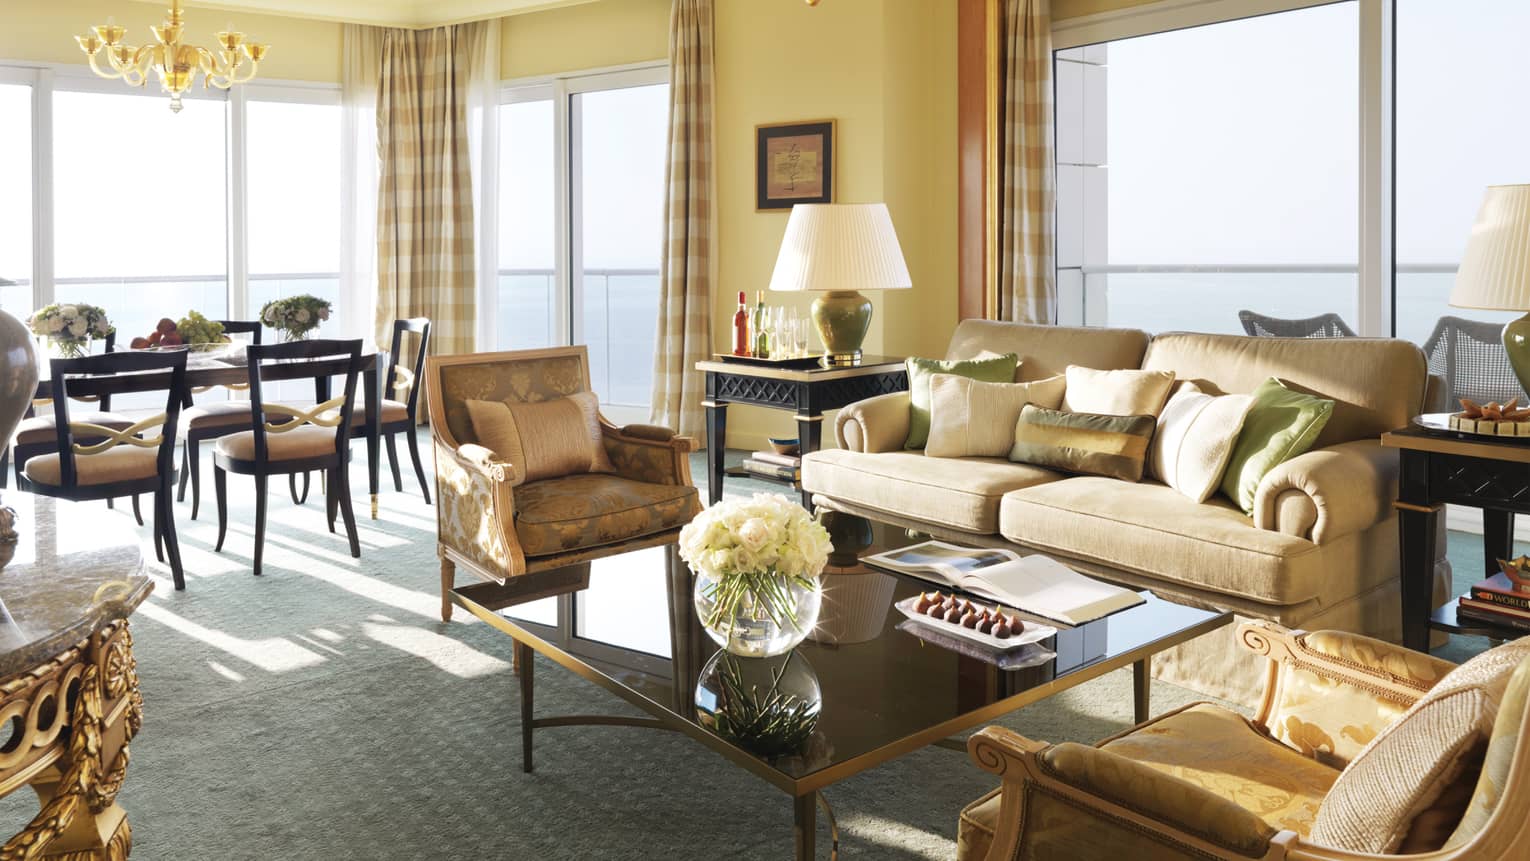 Premier Suite living room, beige sofa with green-and-gold pillows and elegant accent chairs, dining room in background